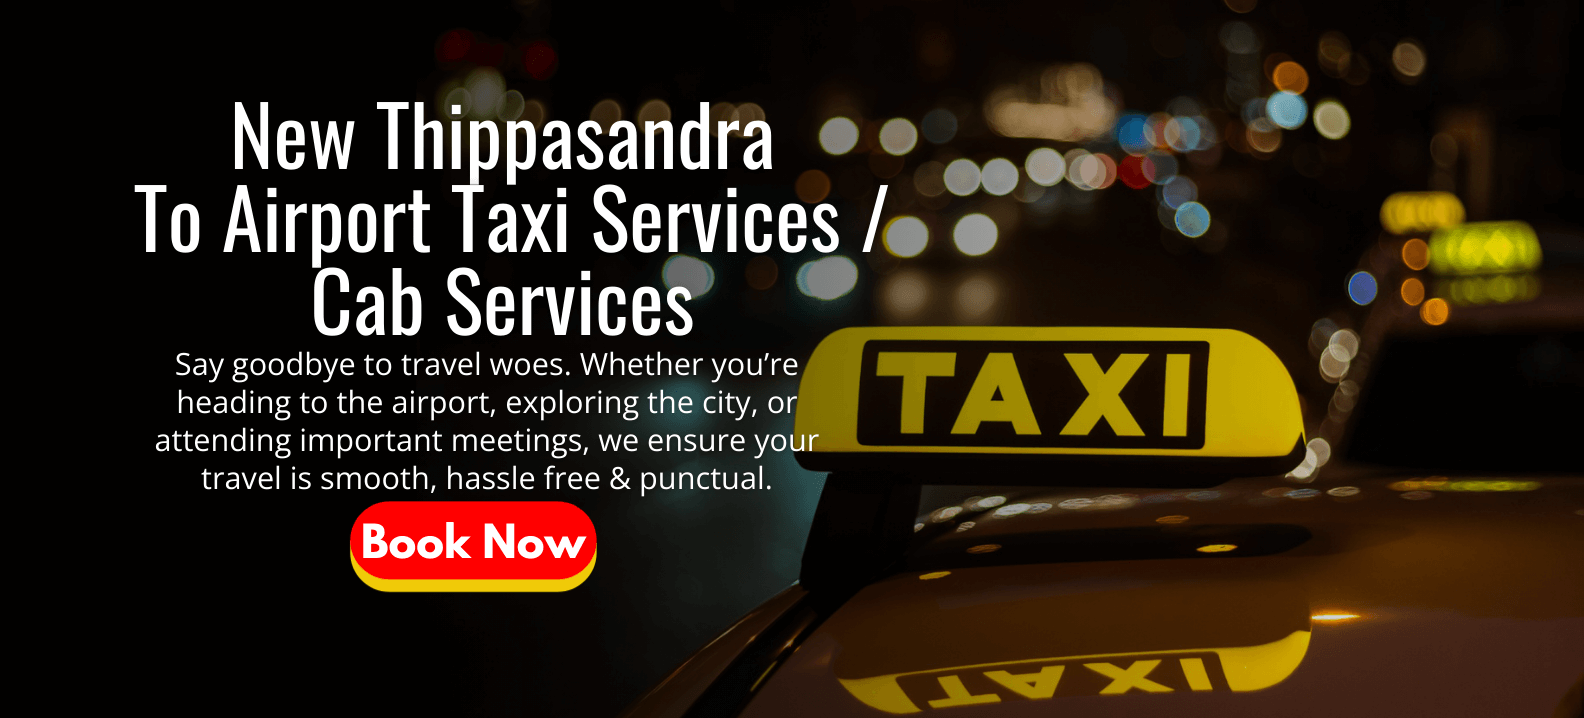 New Tippasandra to Airport Taxi Services | Cab Services